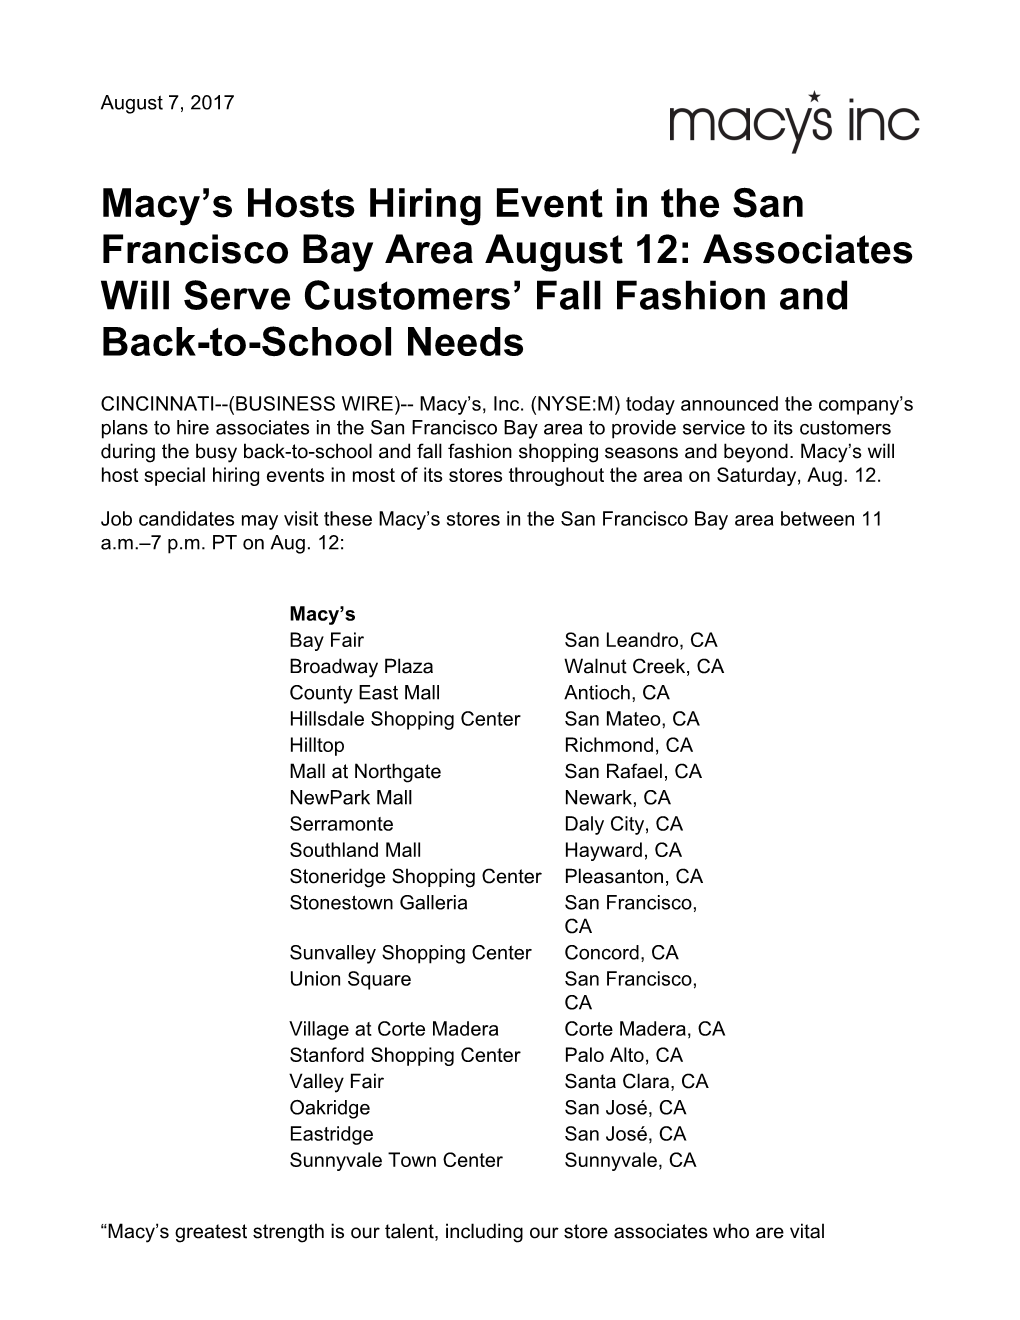 Macy's Hosts Hiring Event in the San Francisco Bay Area August 12